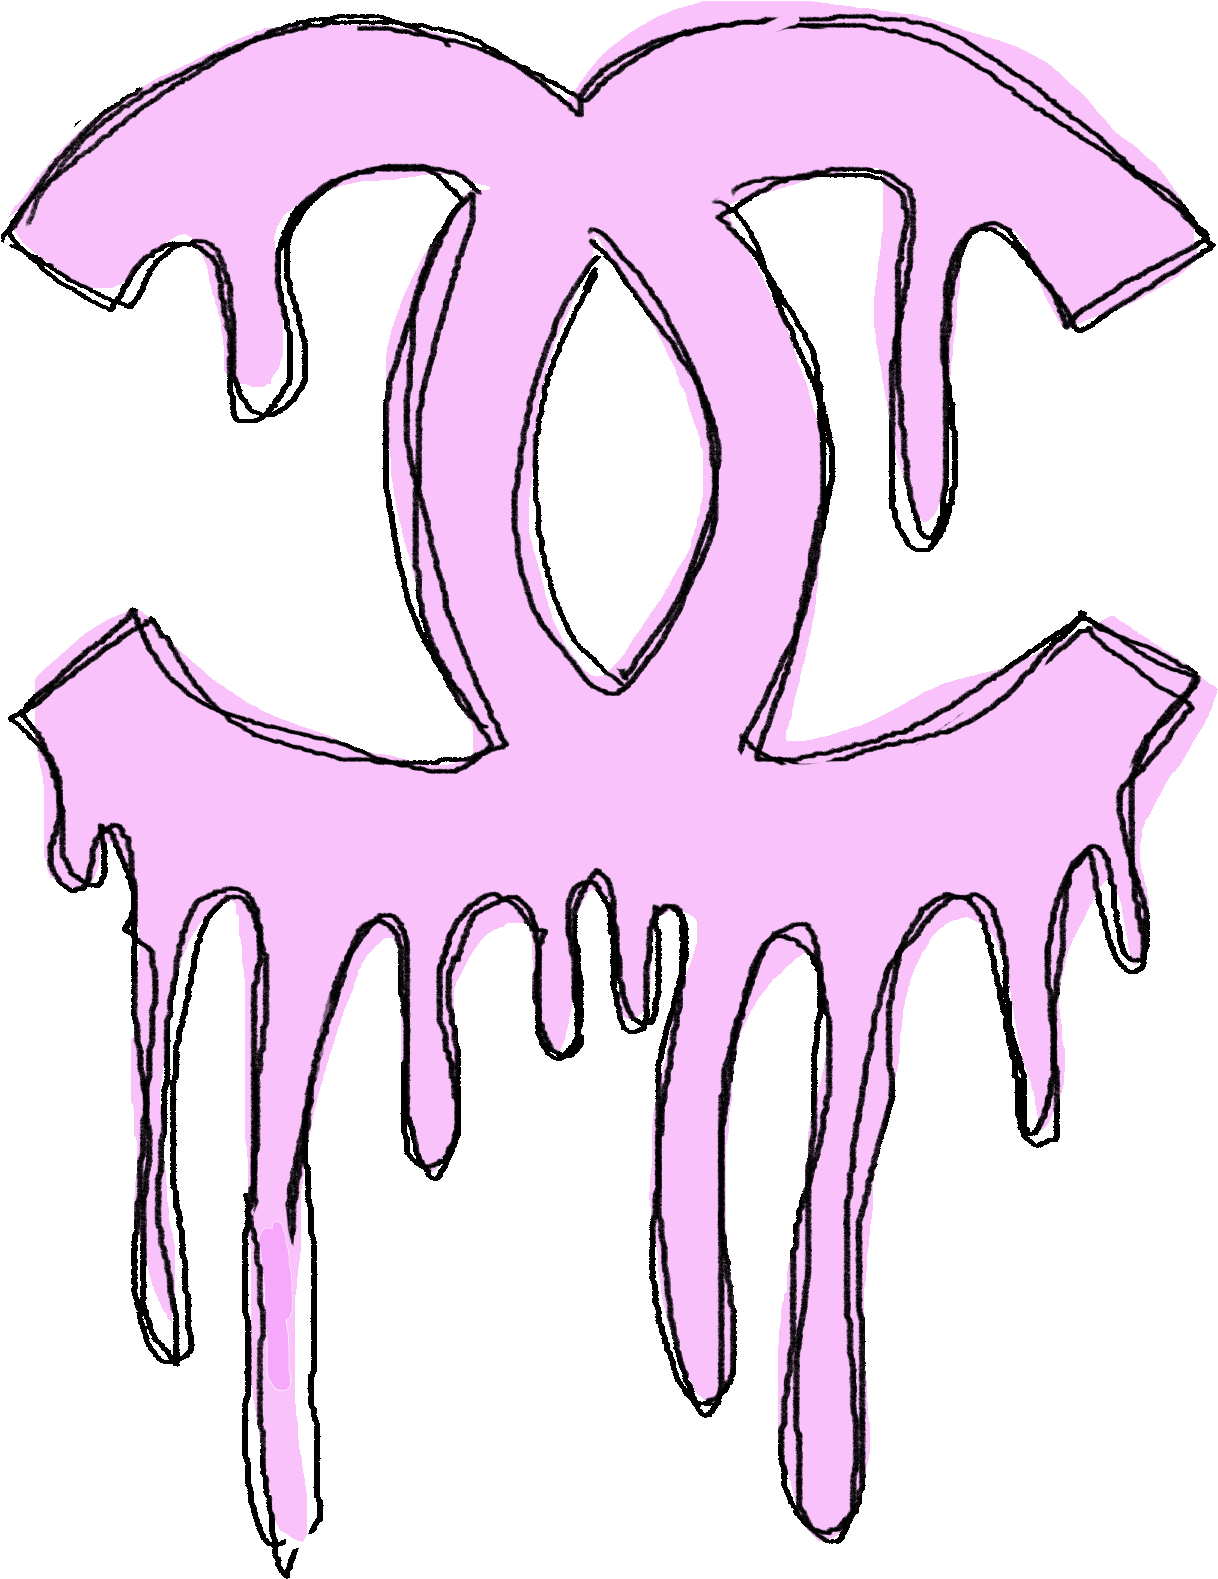 A Pink Logo With Dripping Paint